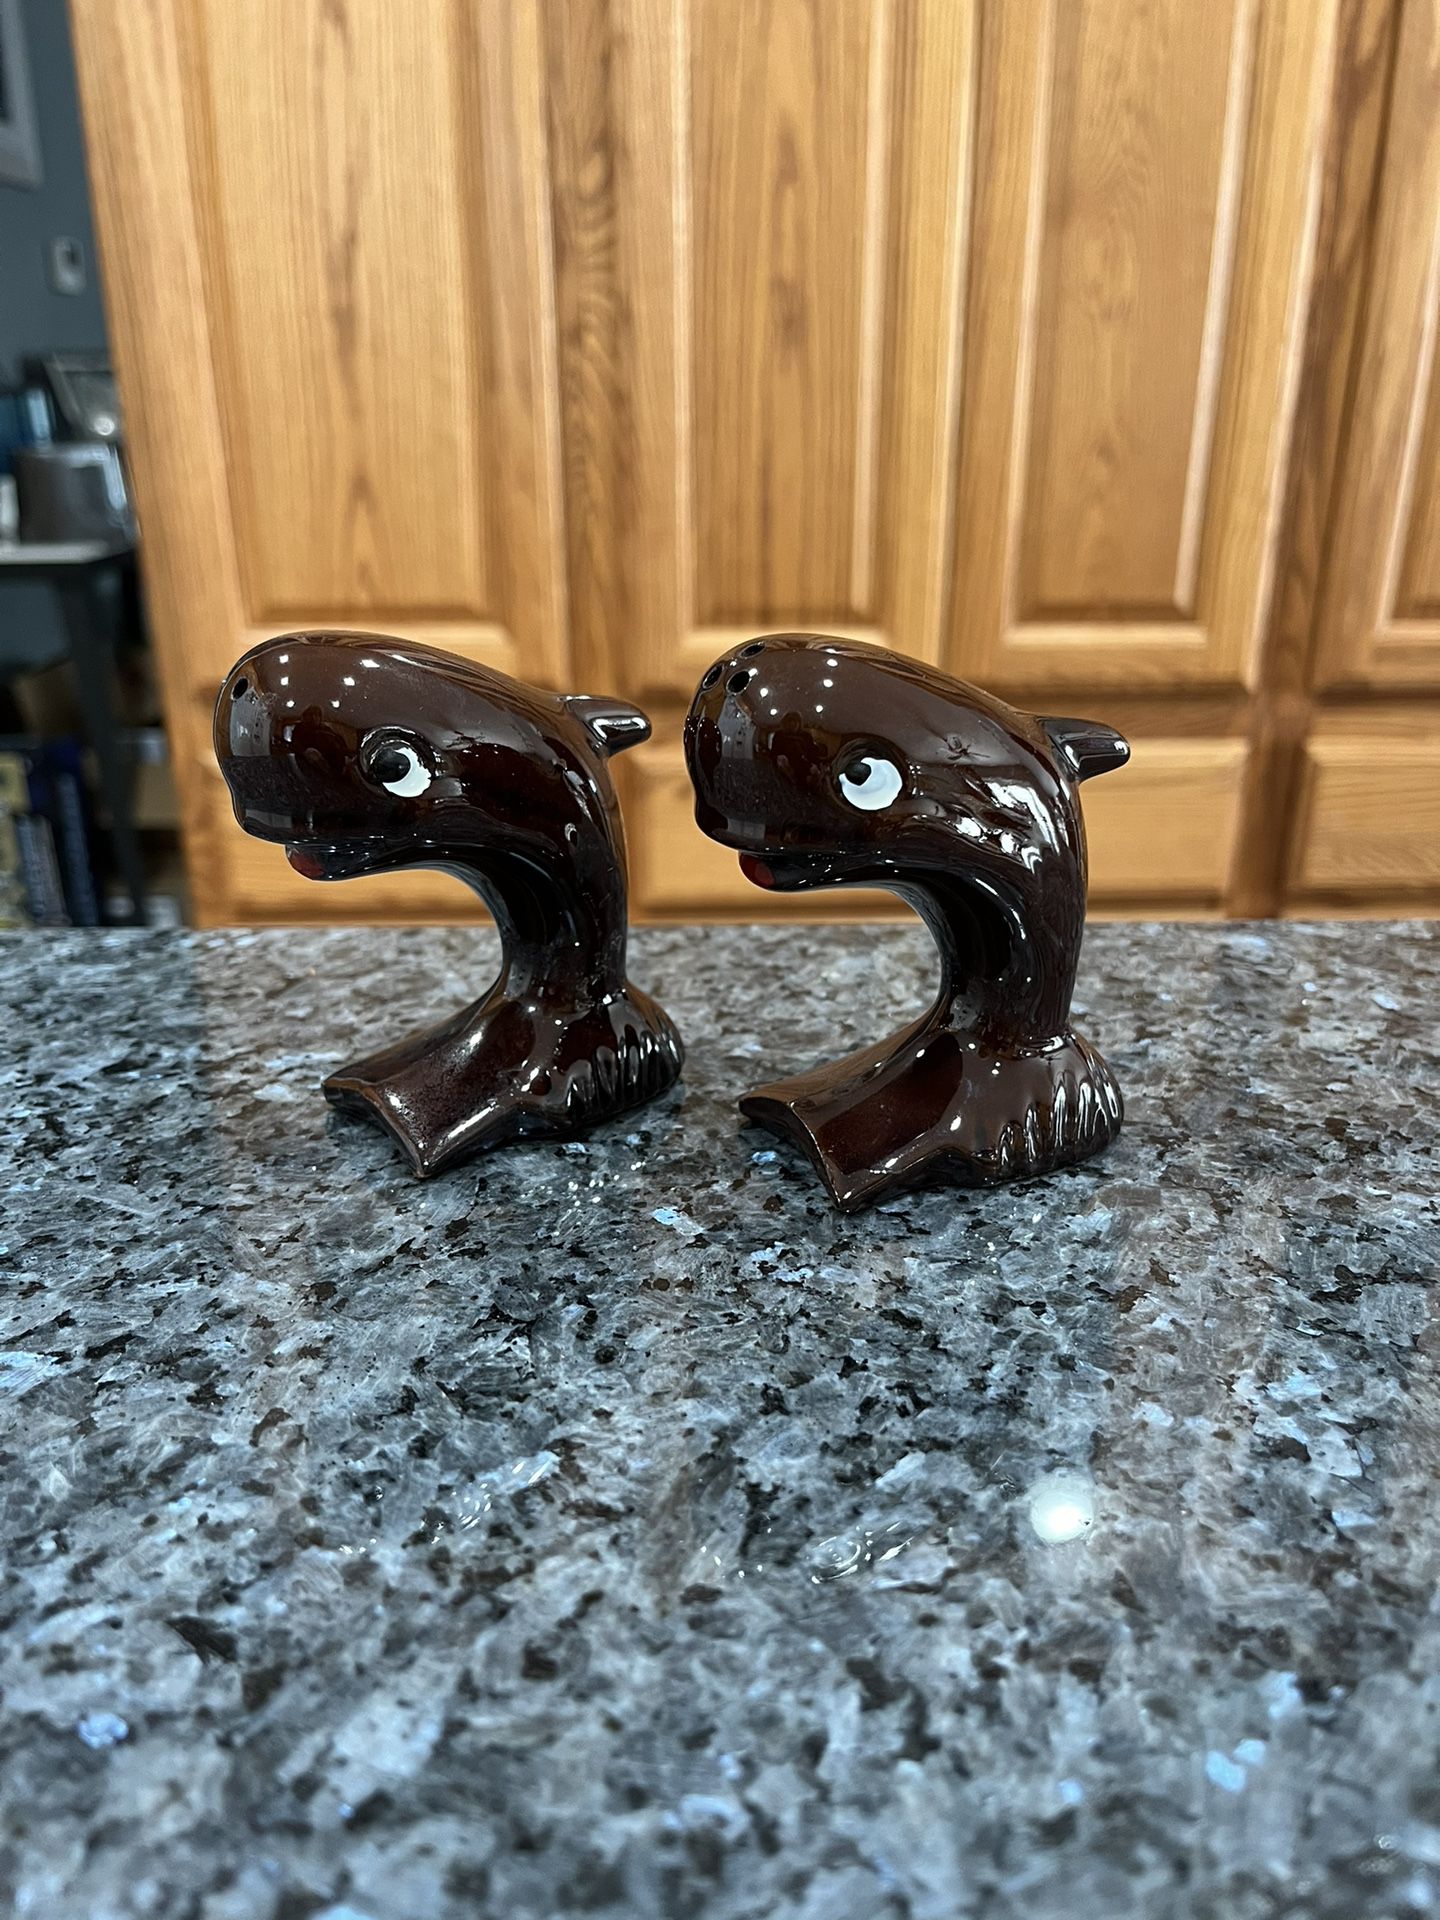 Vintage Anthropomorphic Whale Salt And Pepper Shakers Brown Ceramic.  Preowned On Display 